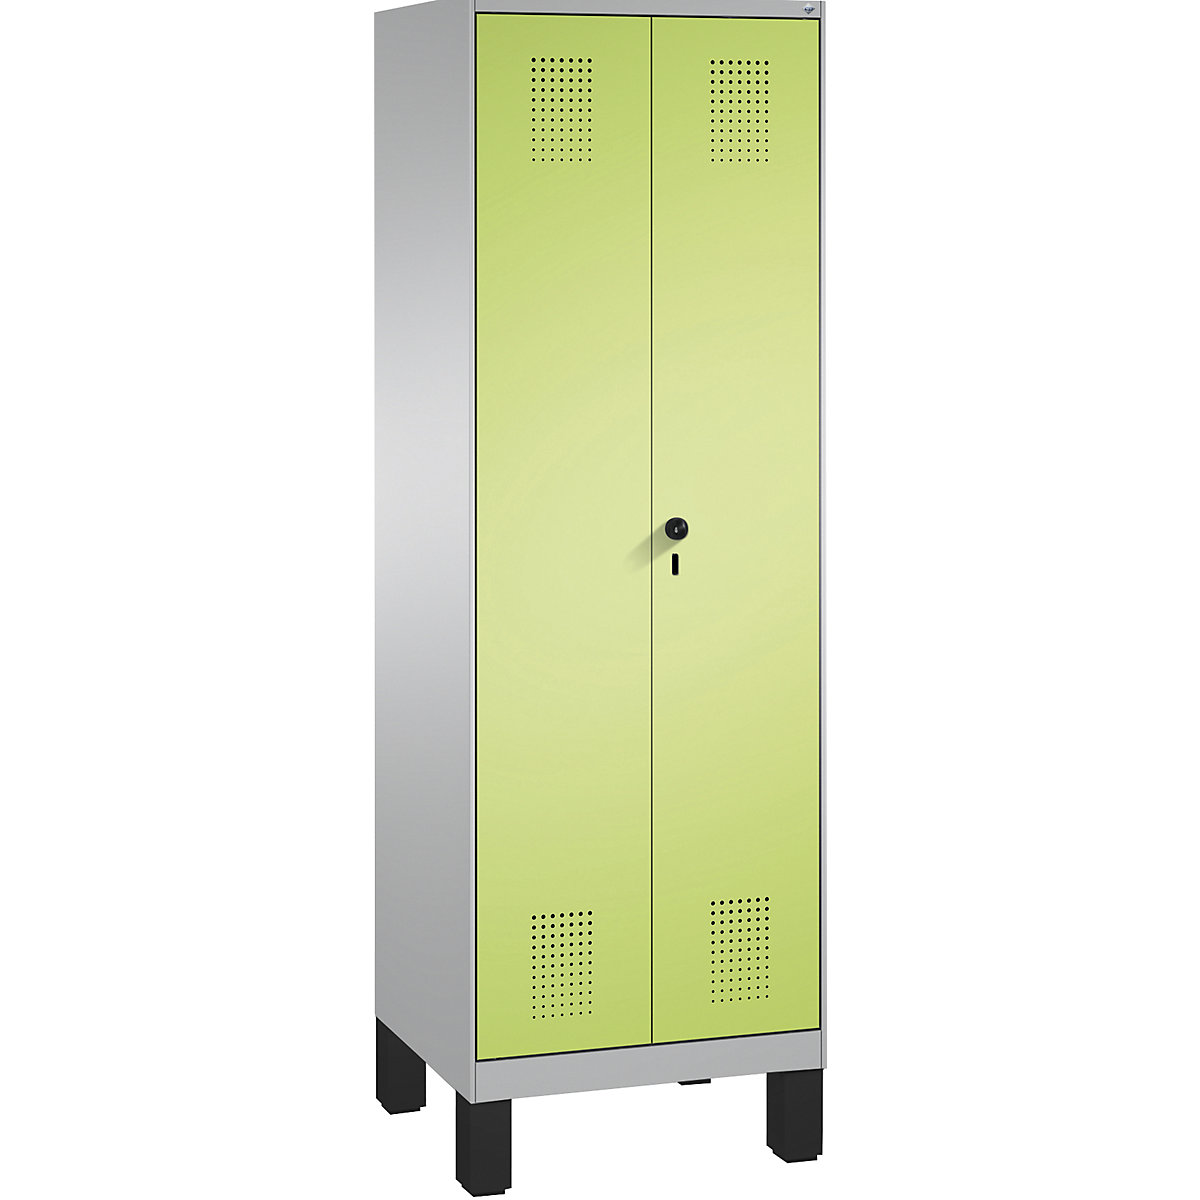 EVOLO laundry cupboard / cloakroom locker – C+P, 4 shelves, clothes rail, compartments 2 x 300 mm, with feet, white aluminium / viridian green-11